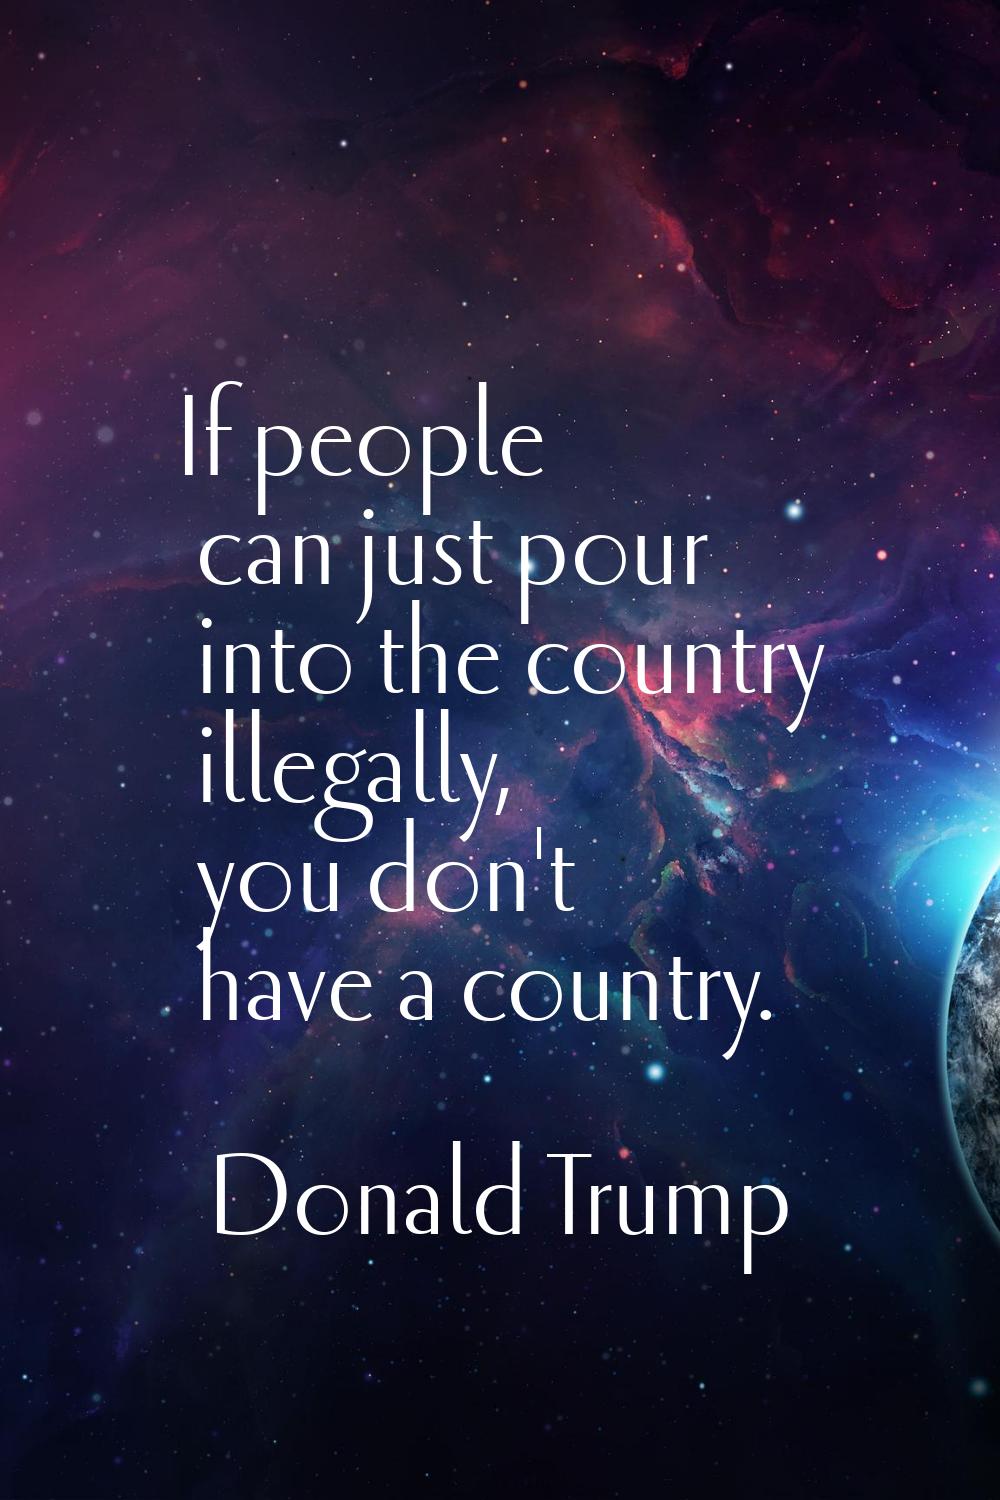 If people can just pour into the country illegally, you don't have a country.